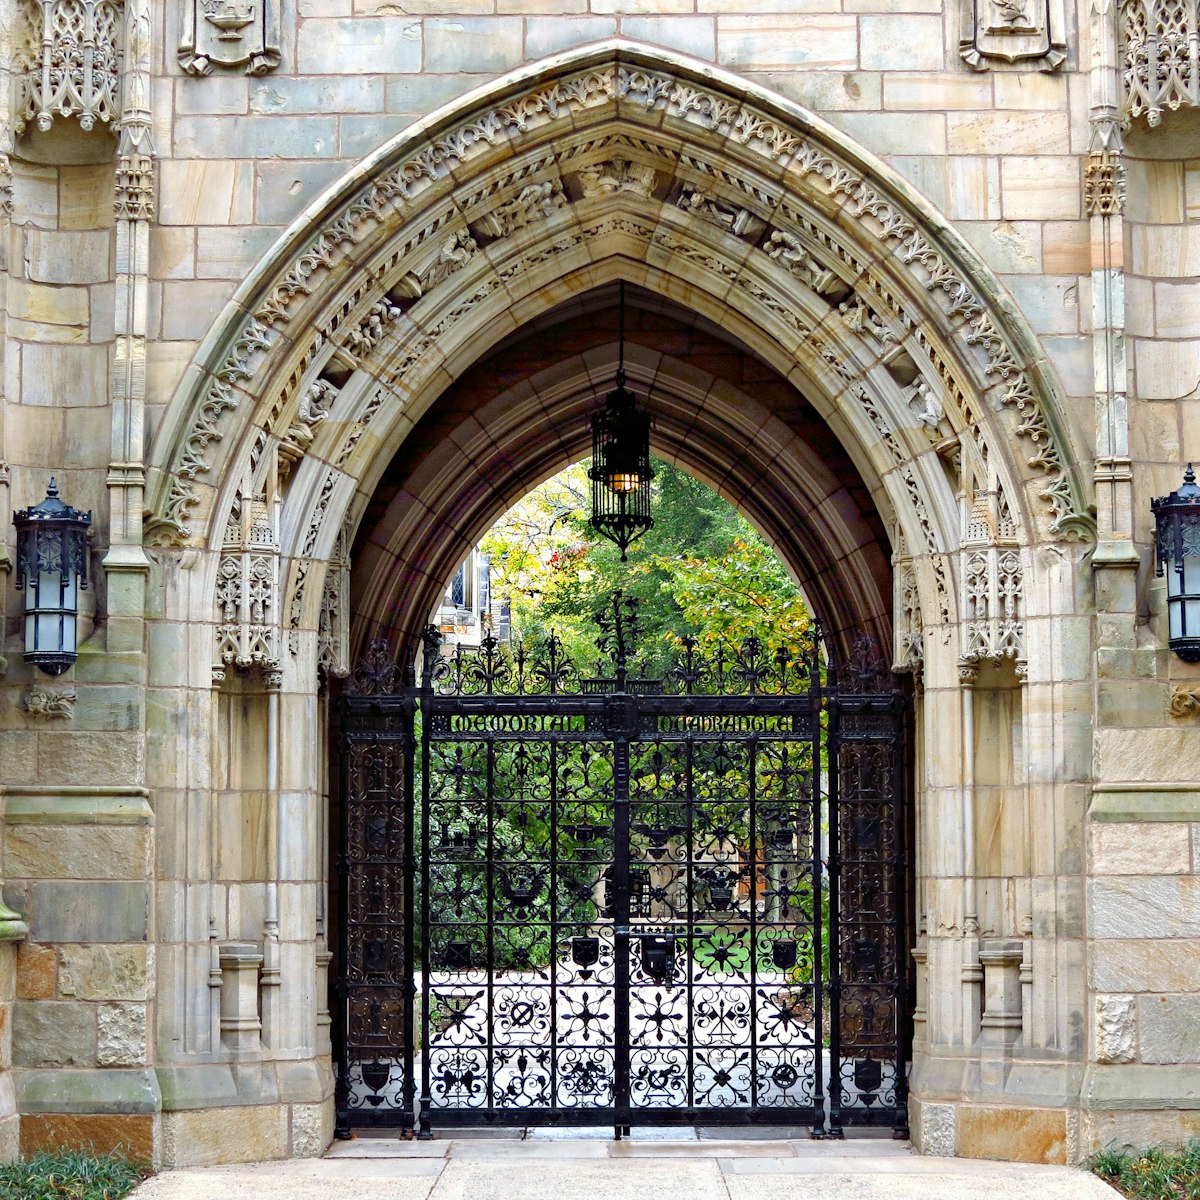 This decorative iron gate is the entrance to the Memorial Quadrangle on the campus of Yale University. The gate beneath Harkness Tower, crafted by Samuel Yellin, is the most ornate of his many works at Yale.